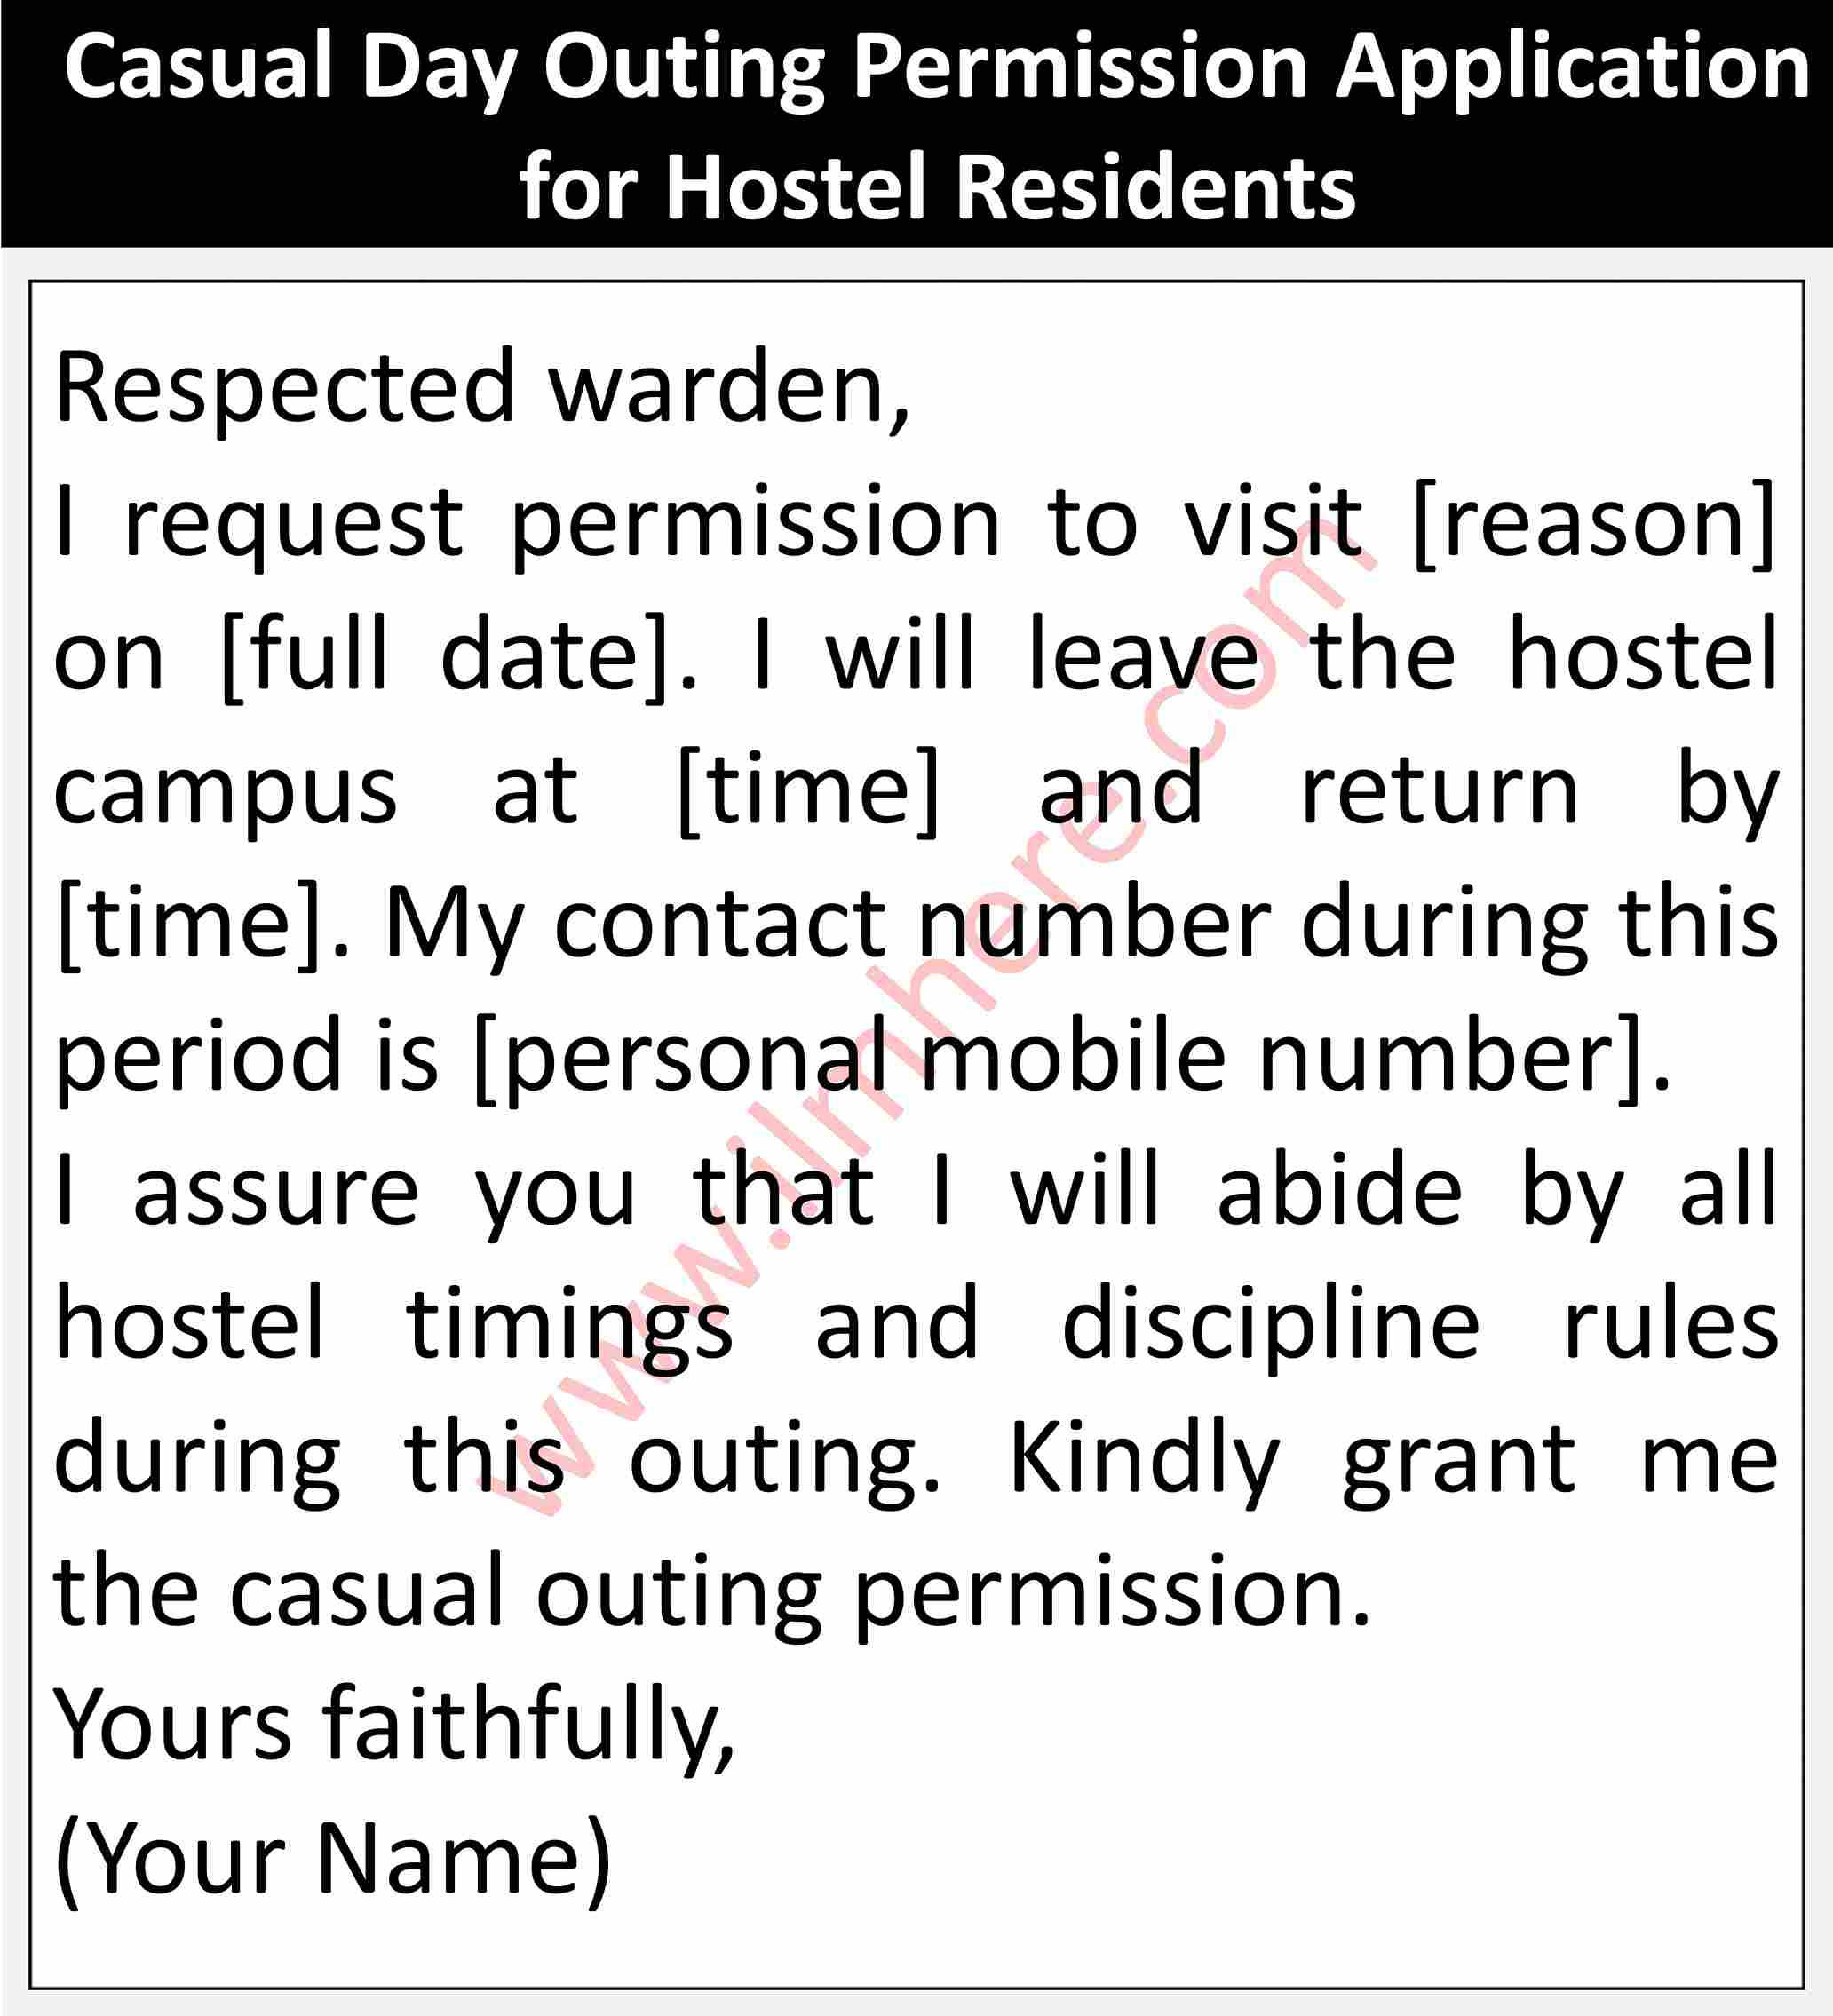 Casual Day Outing Permission Application for Hostel Residents